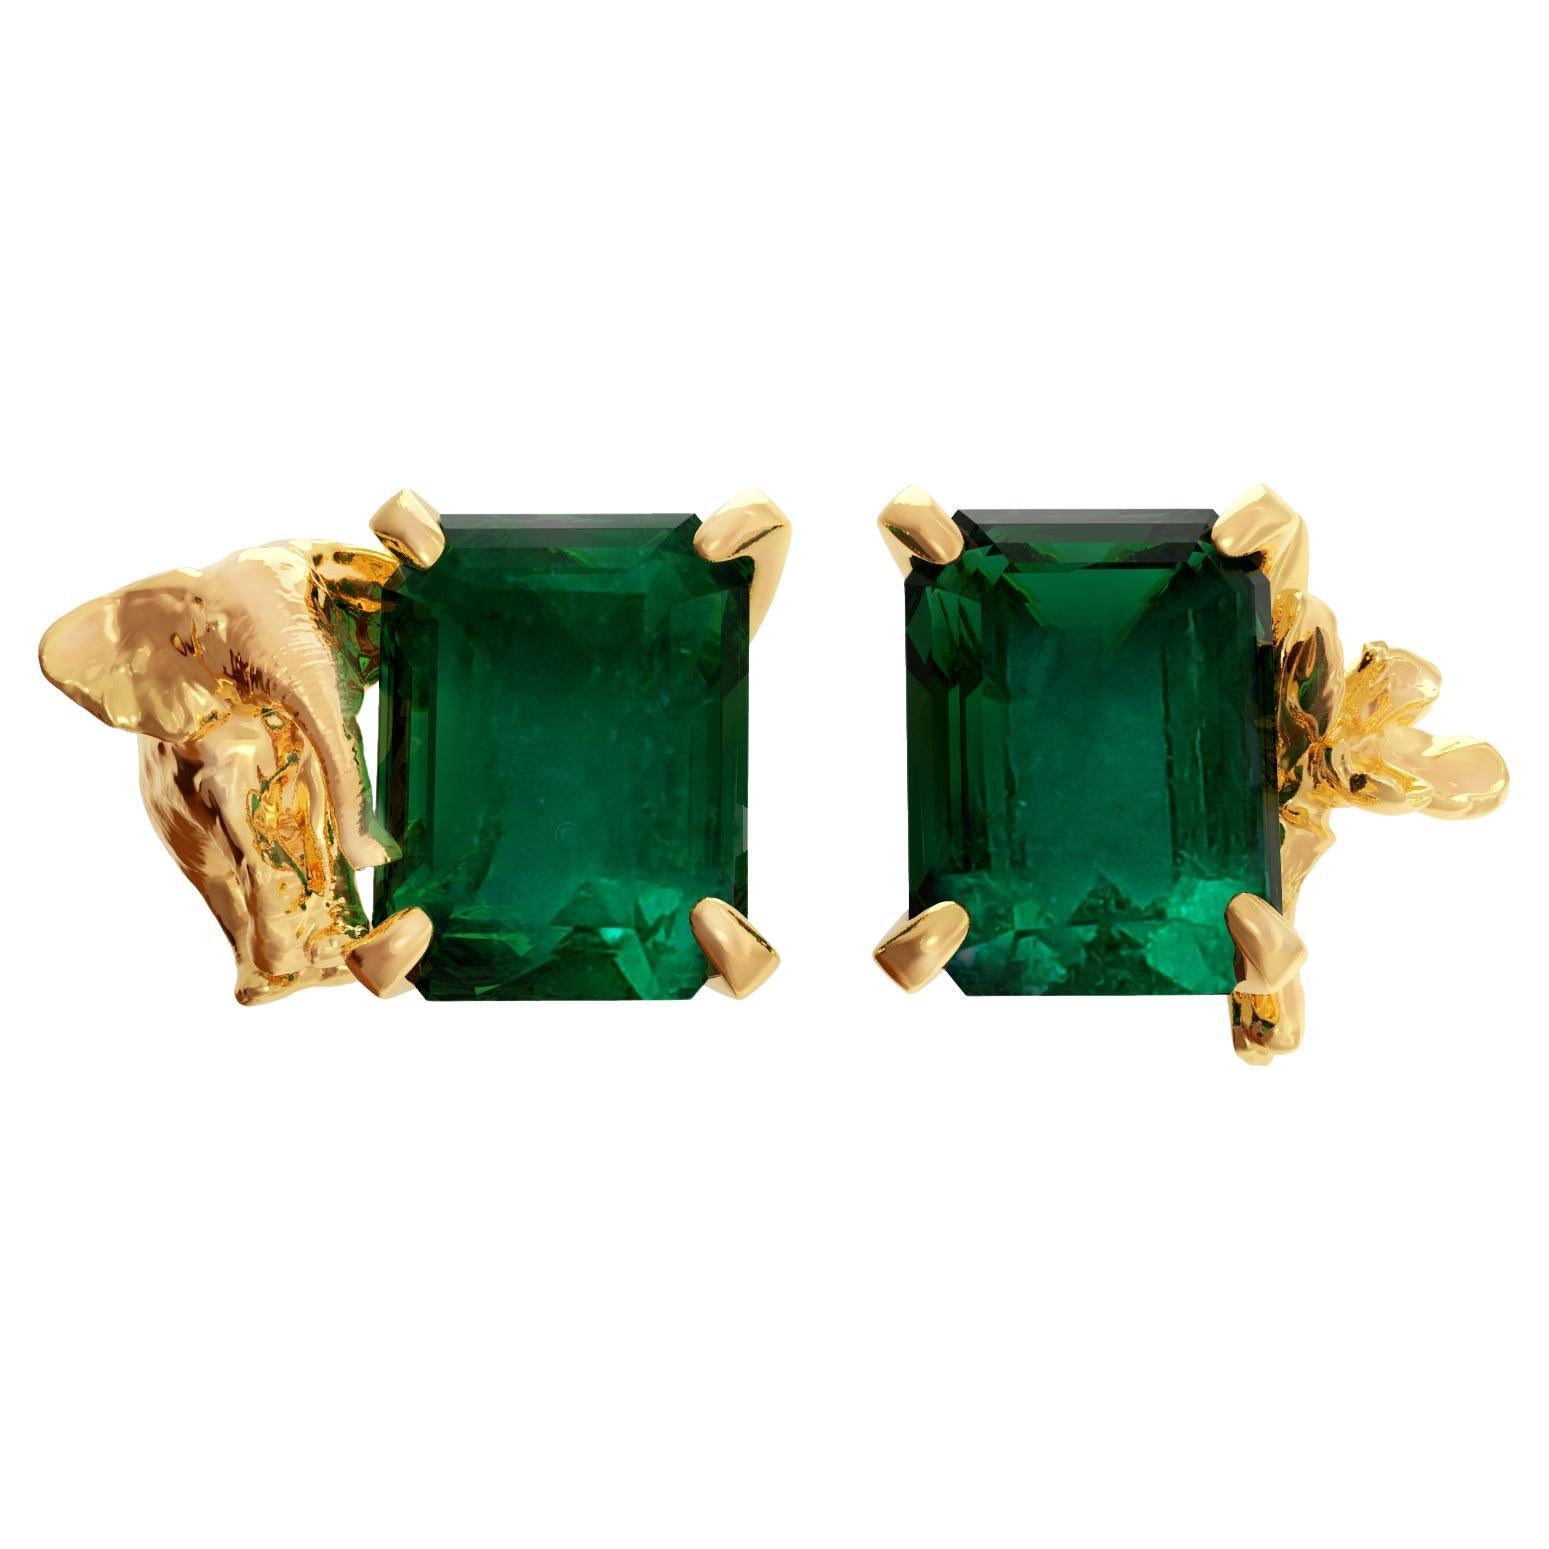 Eighteen Karat Yellow Gold Contemporary Stud Earrings with Natural Emeralds